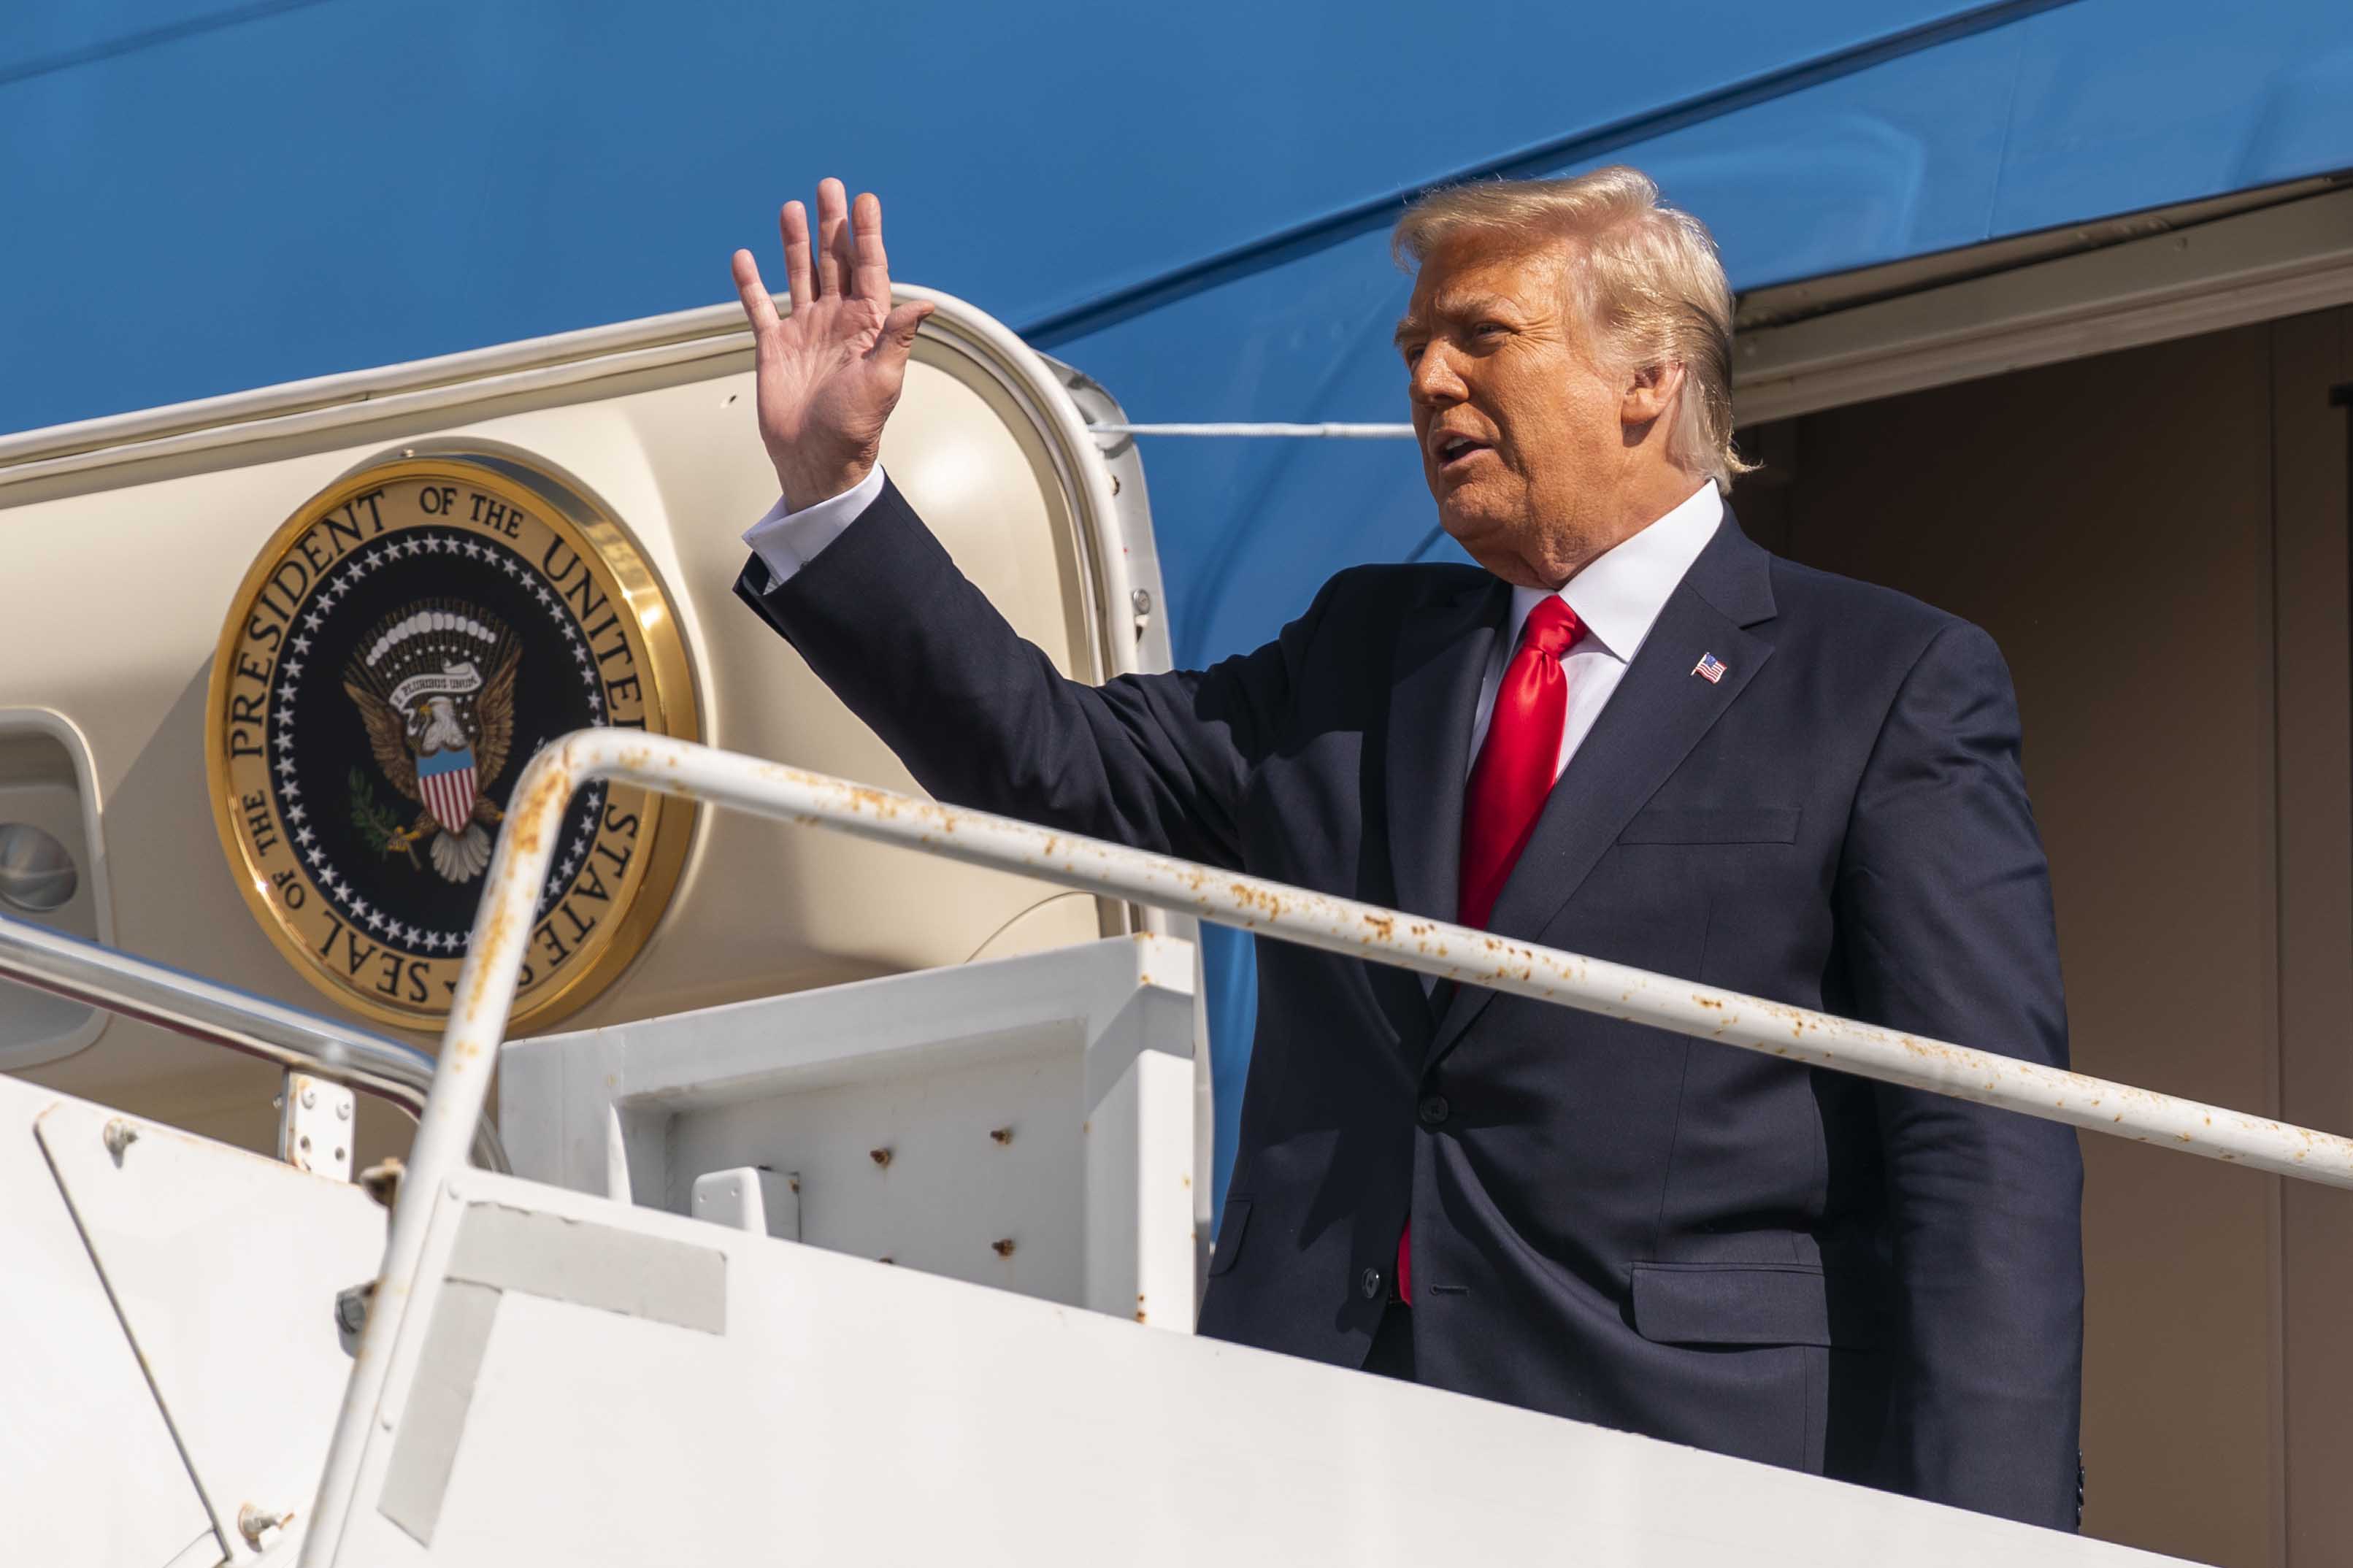 Former President Donald Trump waves as he disembarks from his final flight on Air Force One at Palm Beach International Airport in West Palm Beach, Fla., Wednesday, Jan. 20, 2021.